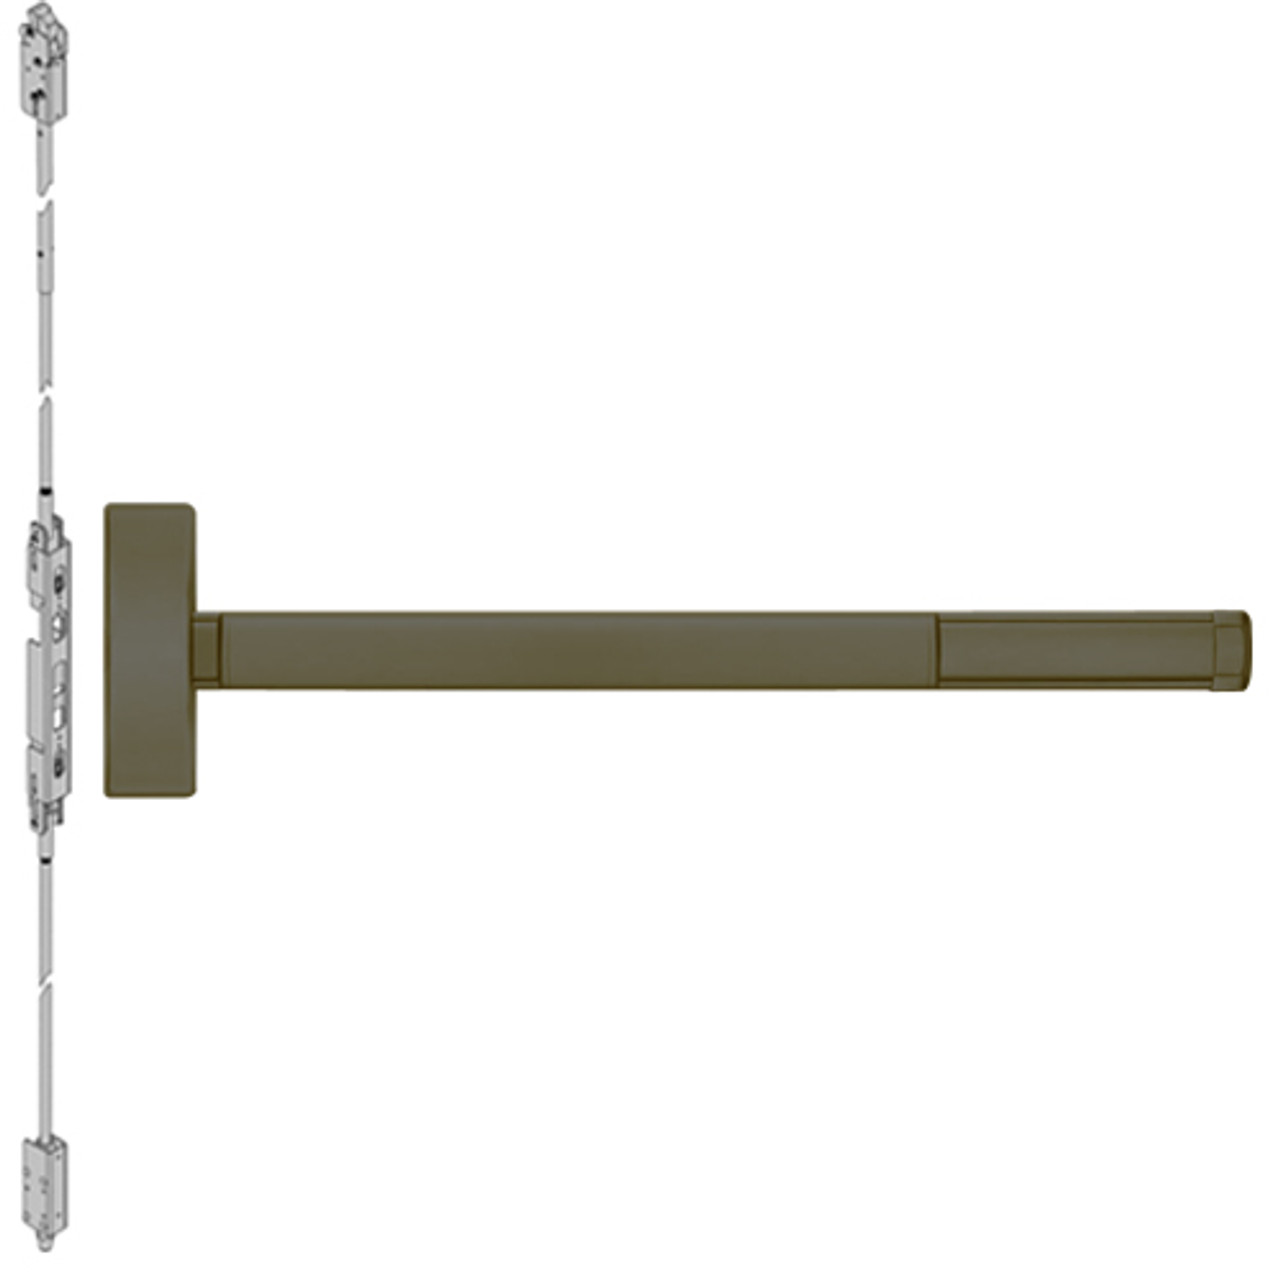 2803LBR-613-36 PHI 2800 Series Non Fire Rated Concealed Vertical Rod Exit Device Prepped for Key Retracts Latchbolt in Oil Rubbed Bronze Finish